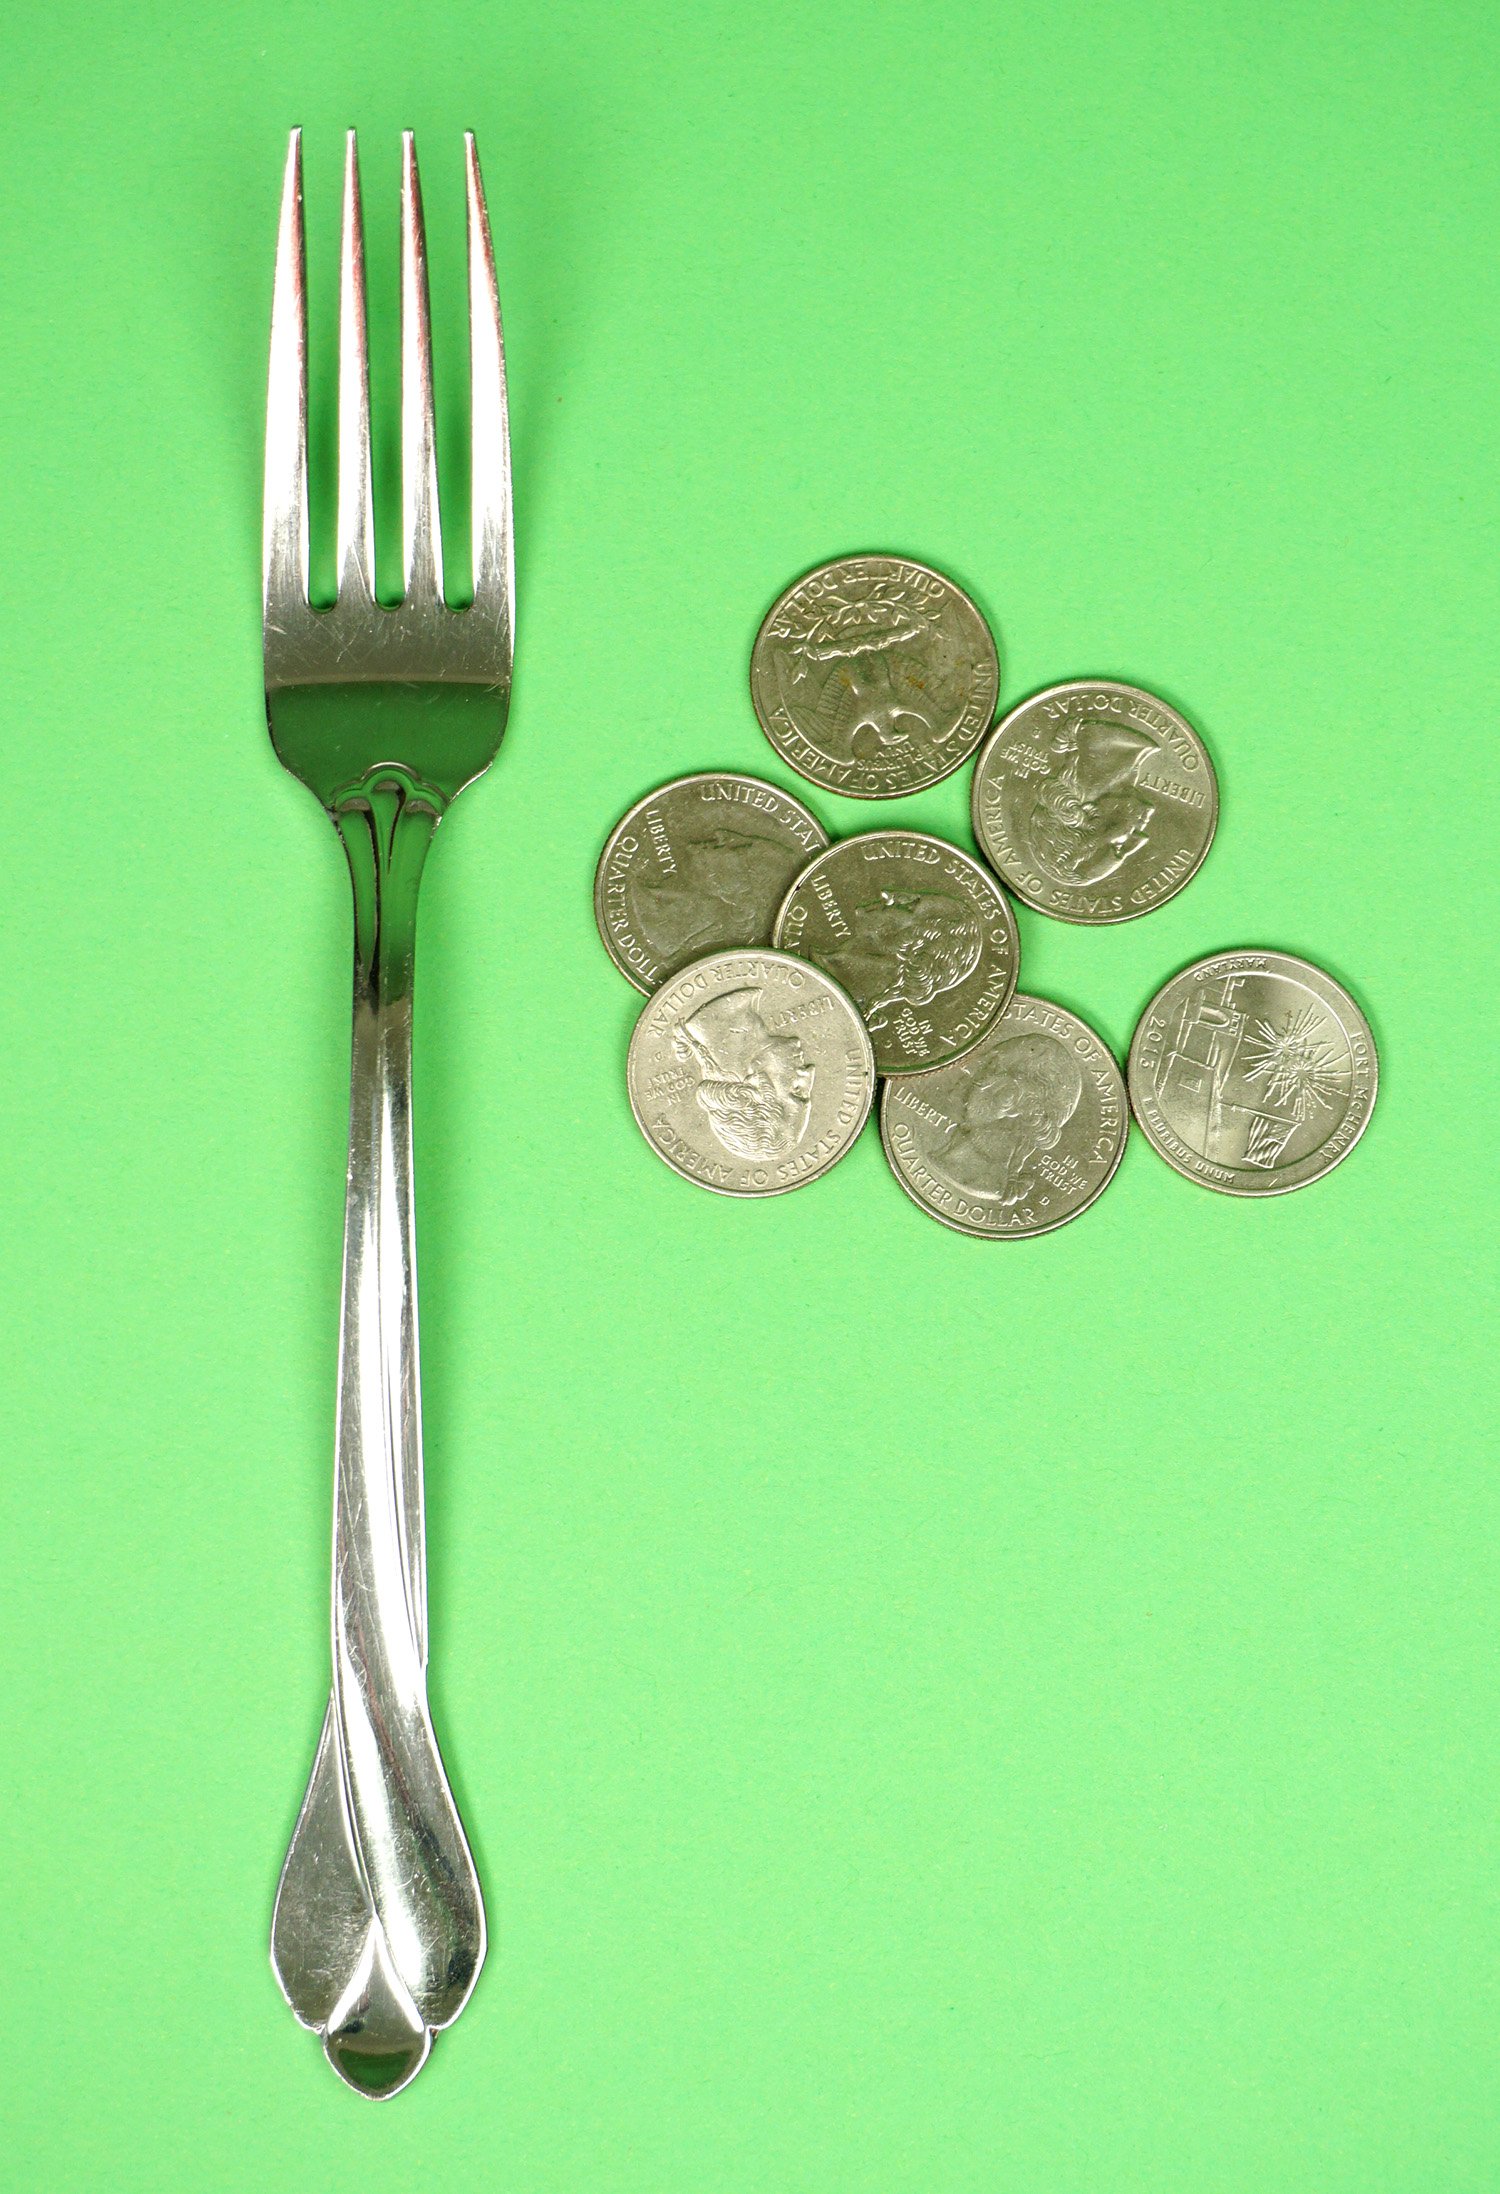 forks and quarters for game